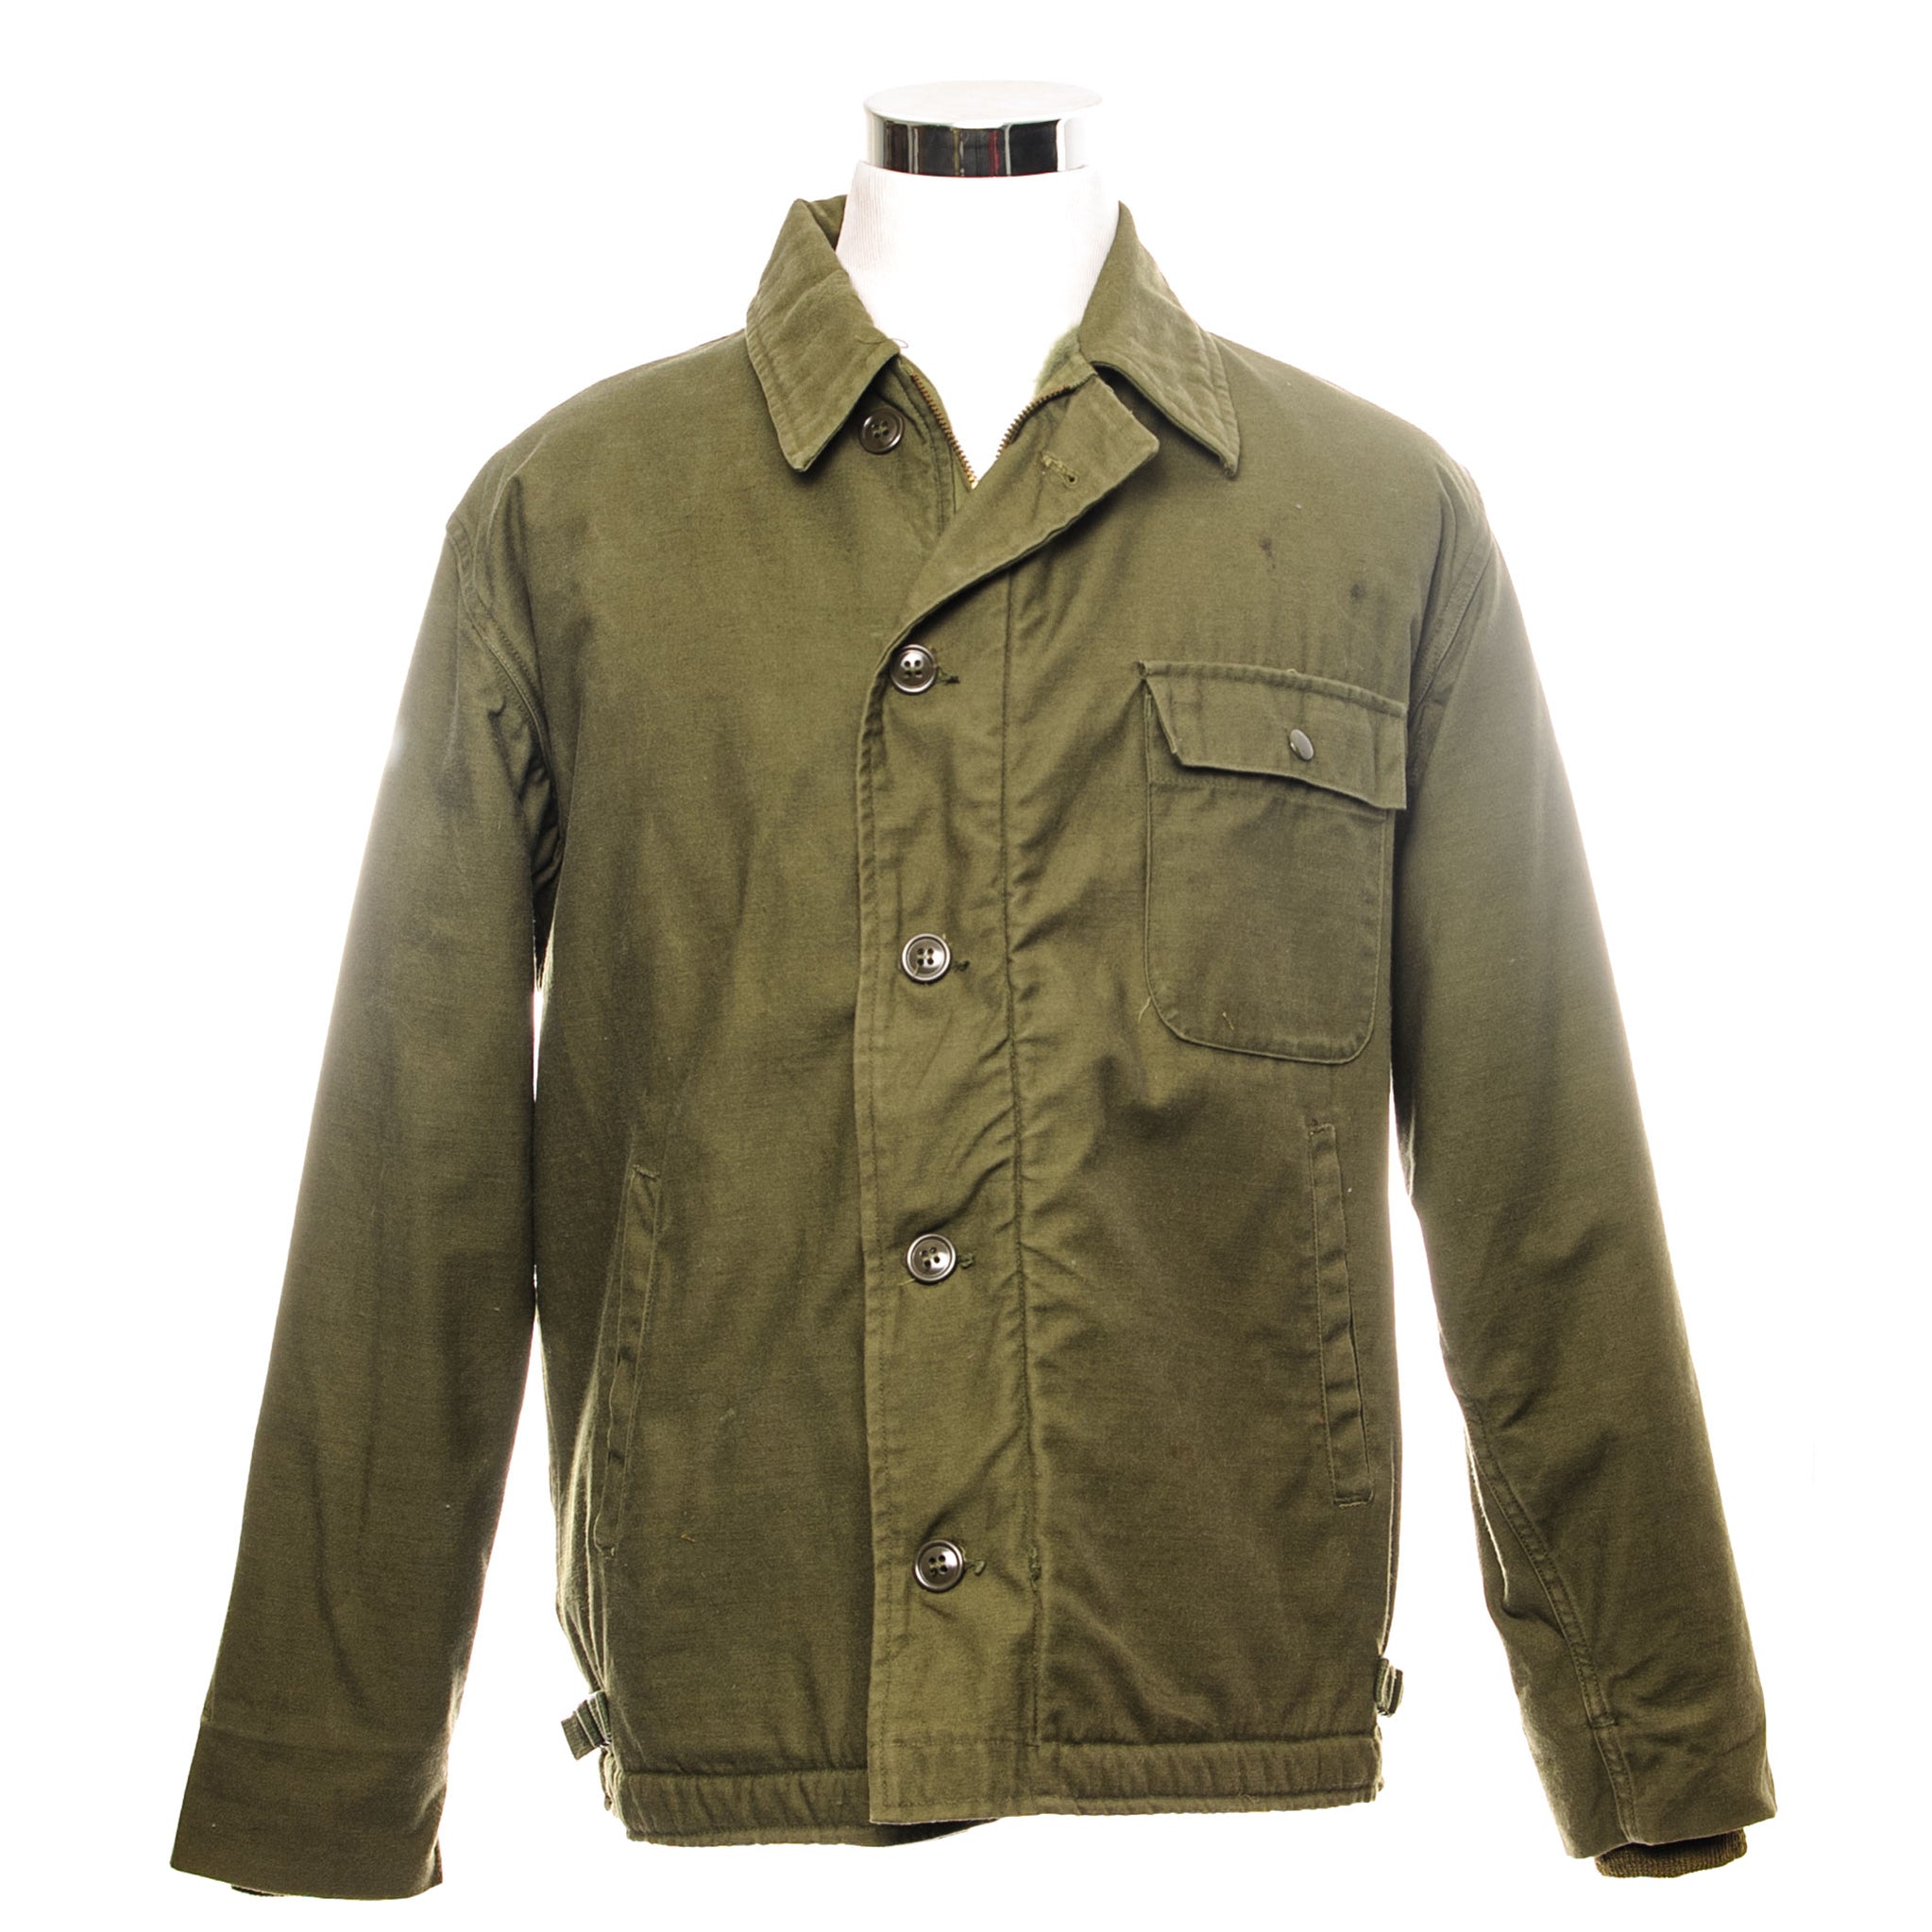 US NAVY A-2 DECK JACKET 総合ショッピングサイト - www